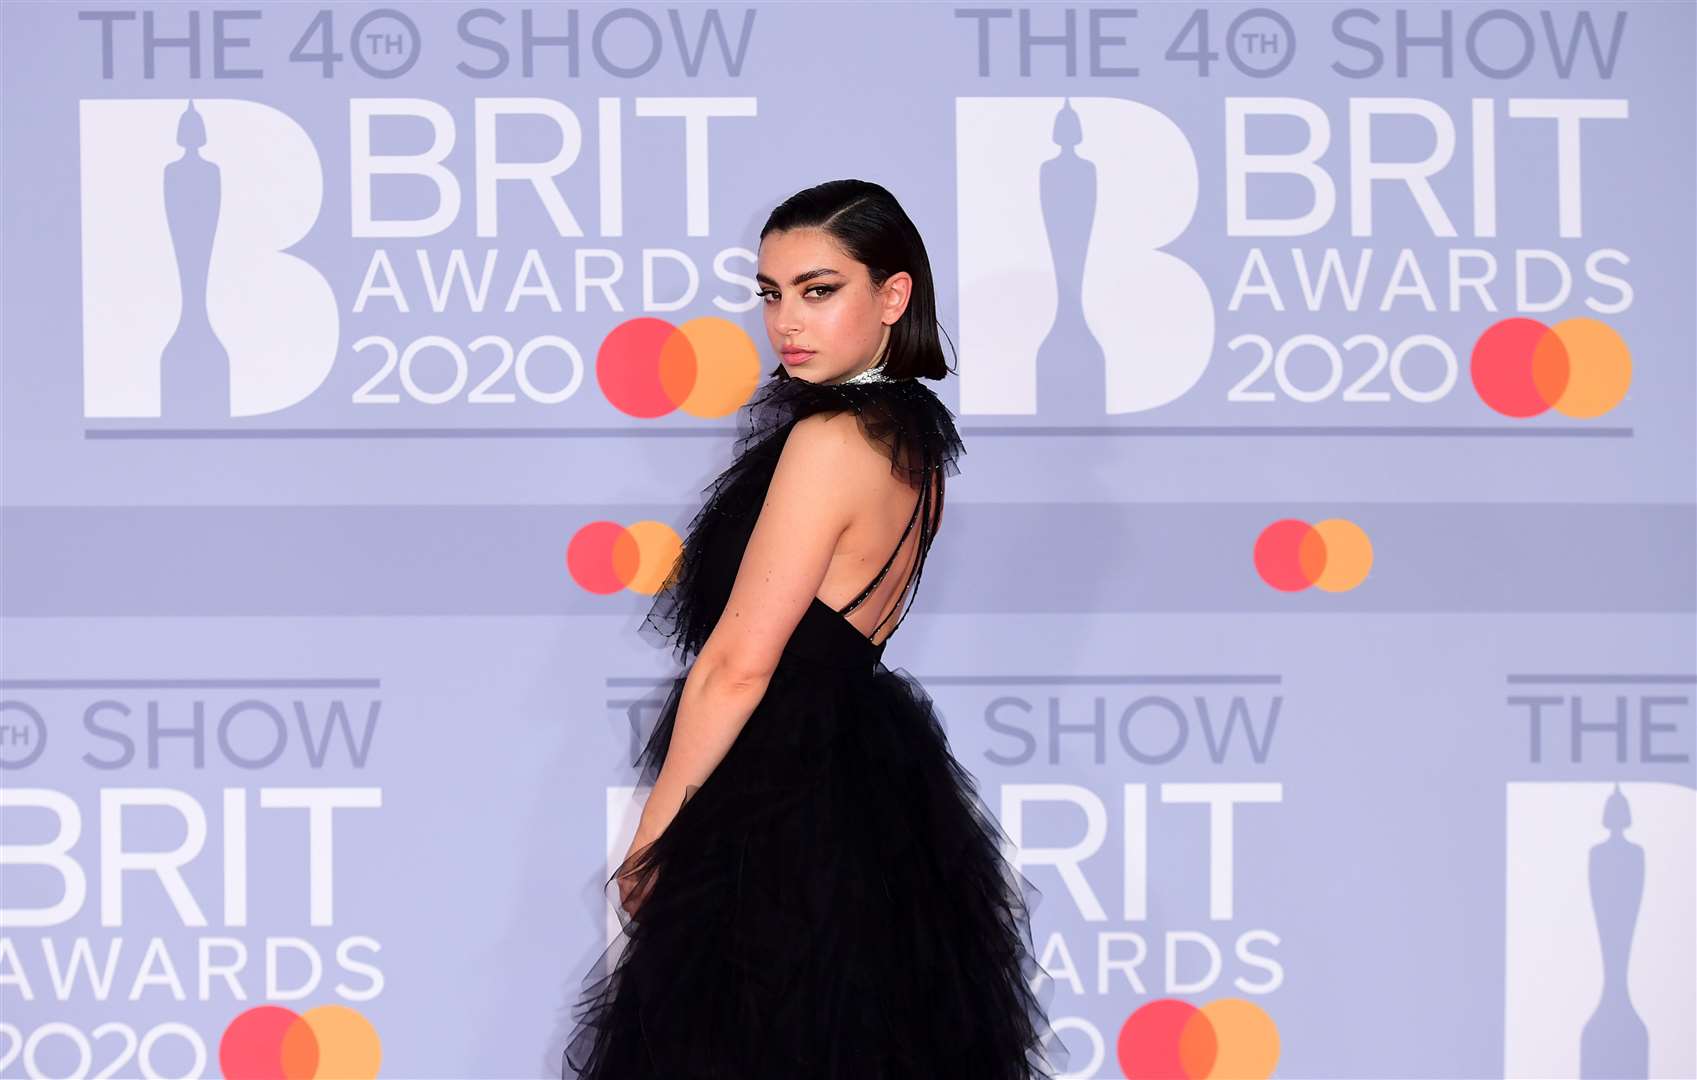 Charli XCX thanked fans for ‘paying my bills’ and added they have’amazing taste’.